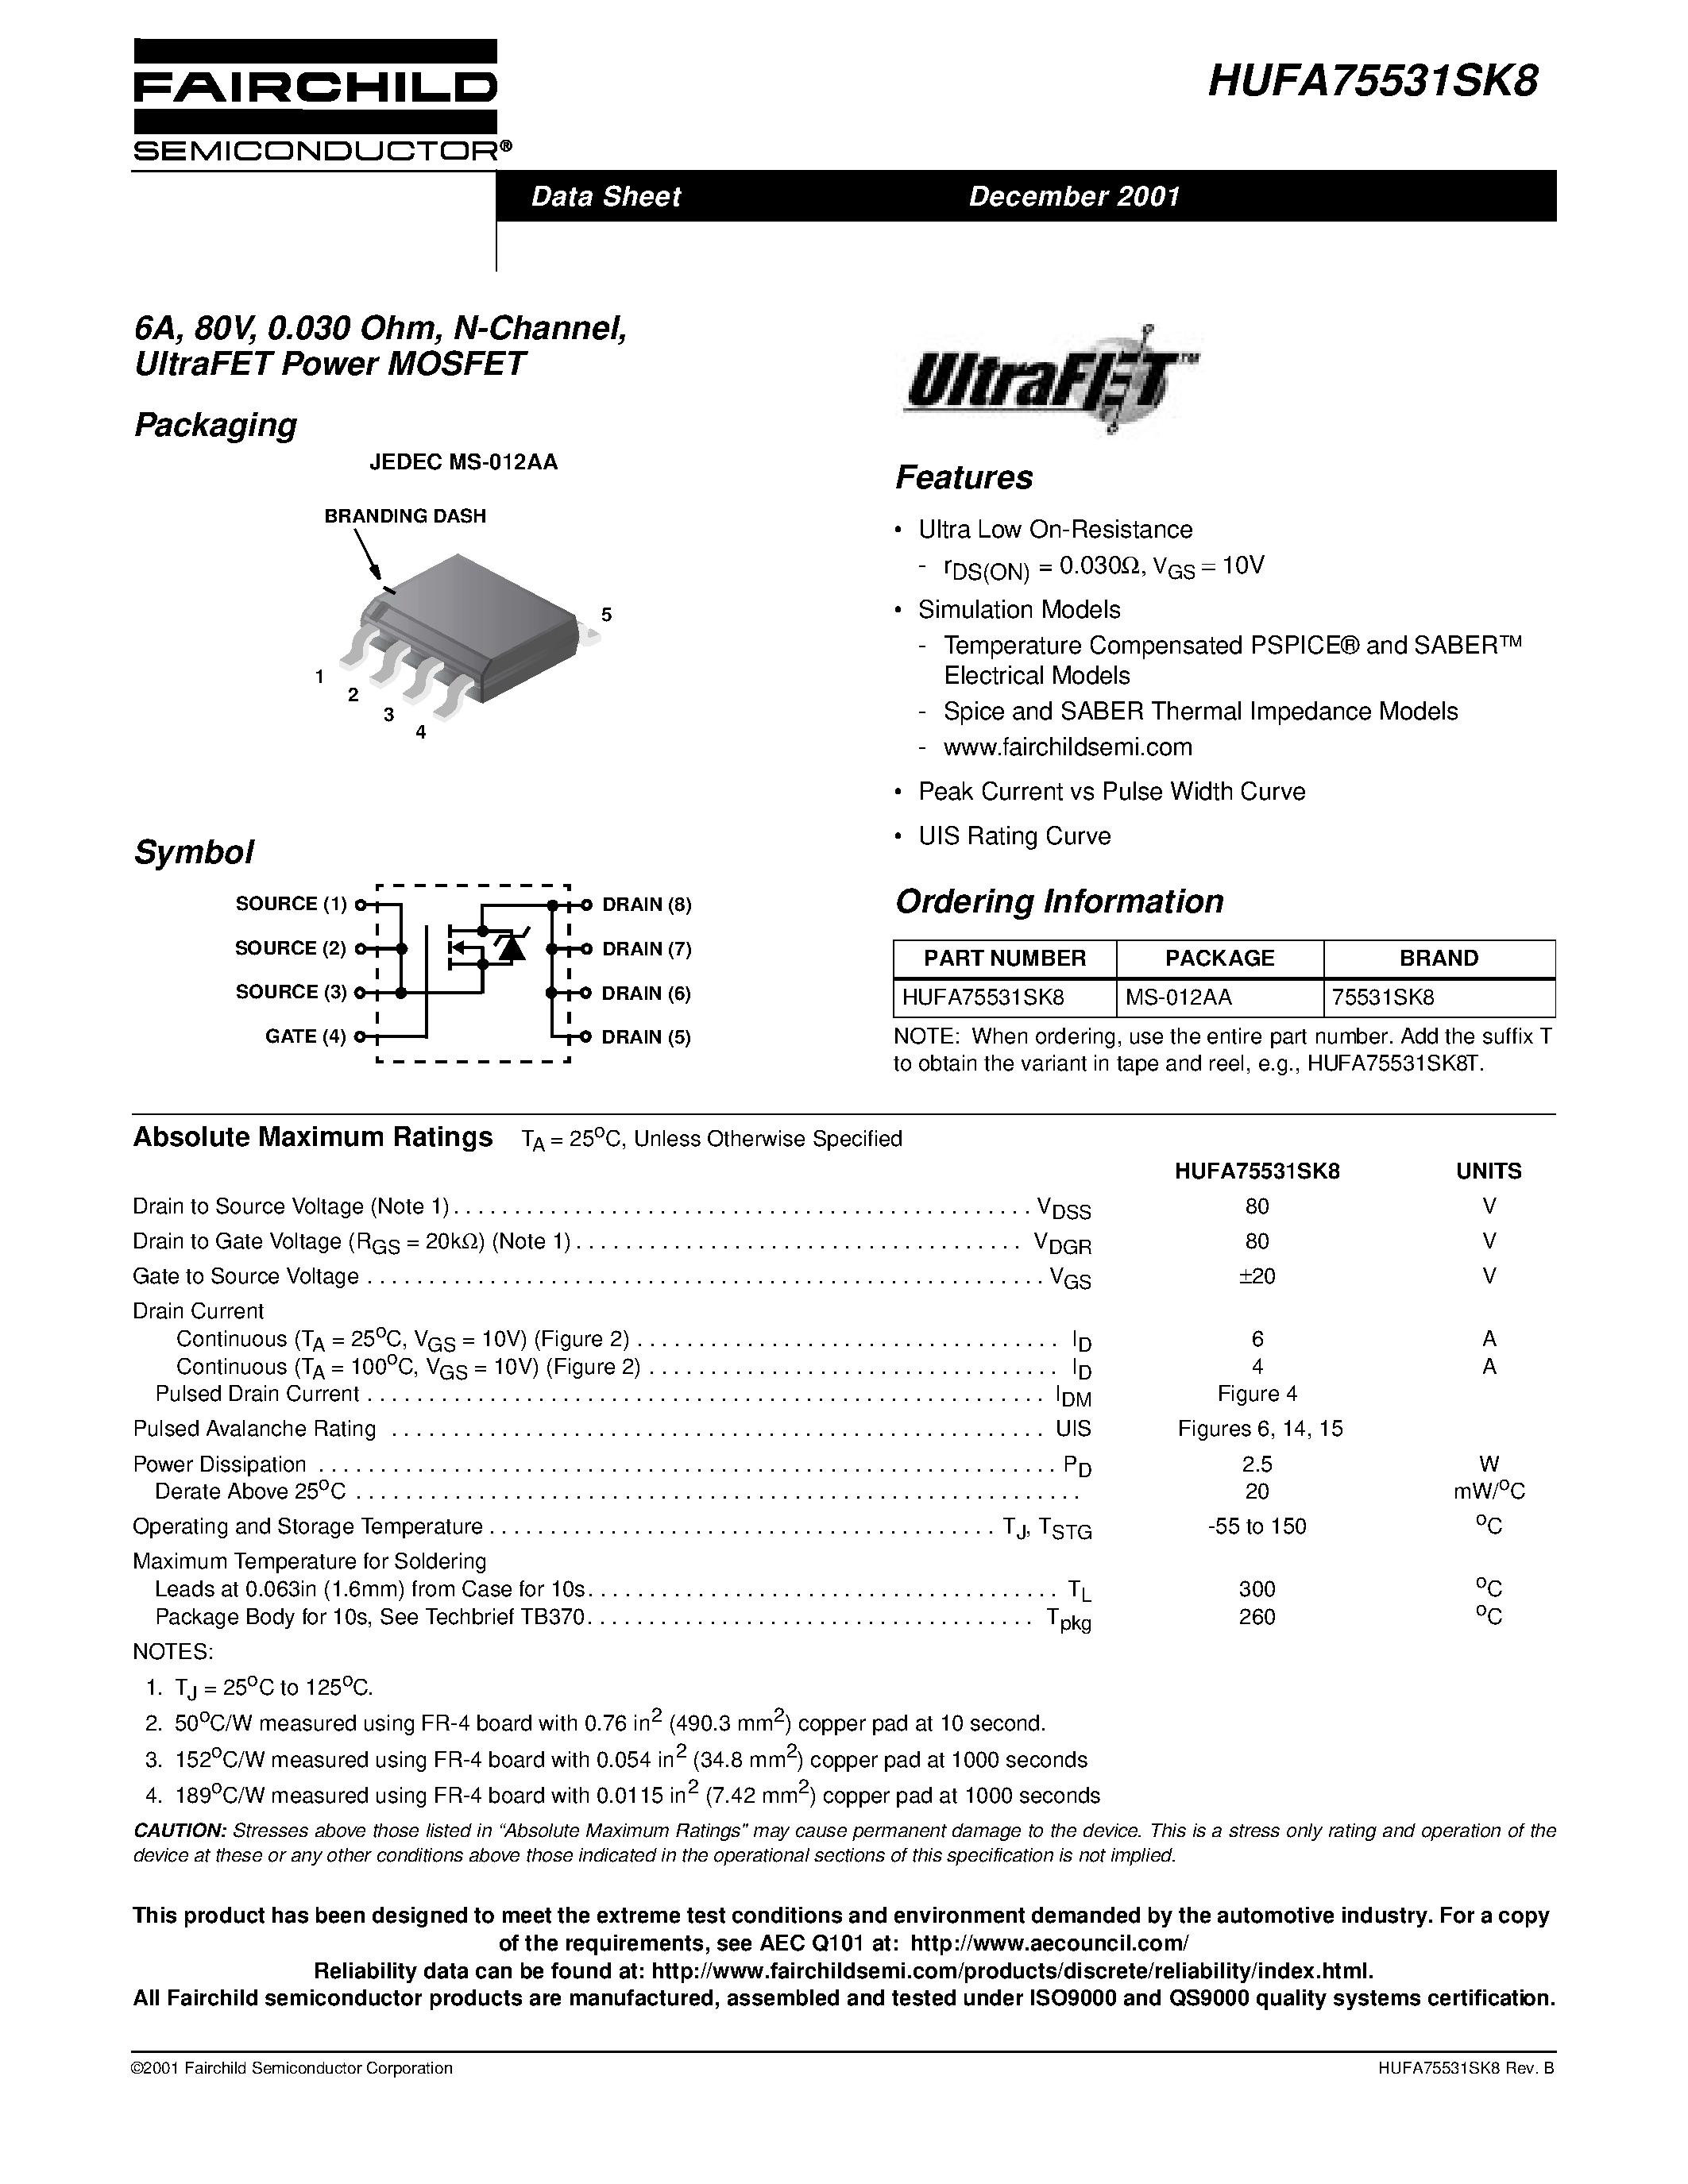 Даташит HUFA75531SK8 - 6A/ 80V/ 0.030 Ohm/ N-Channel/ UltraFET Power MOSFET страница 1